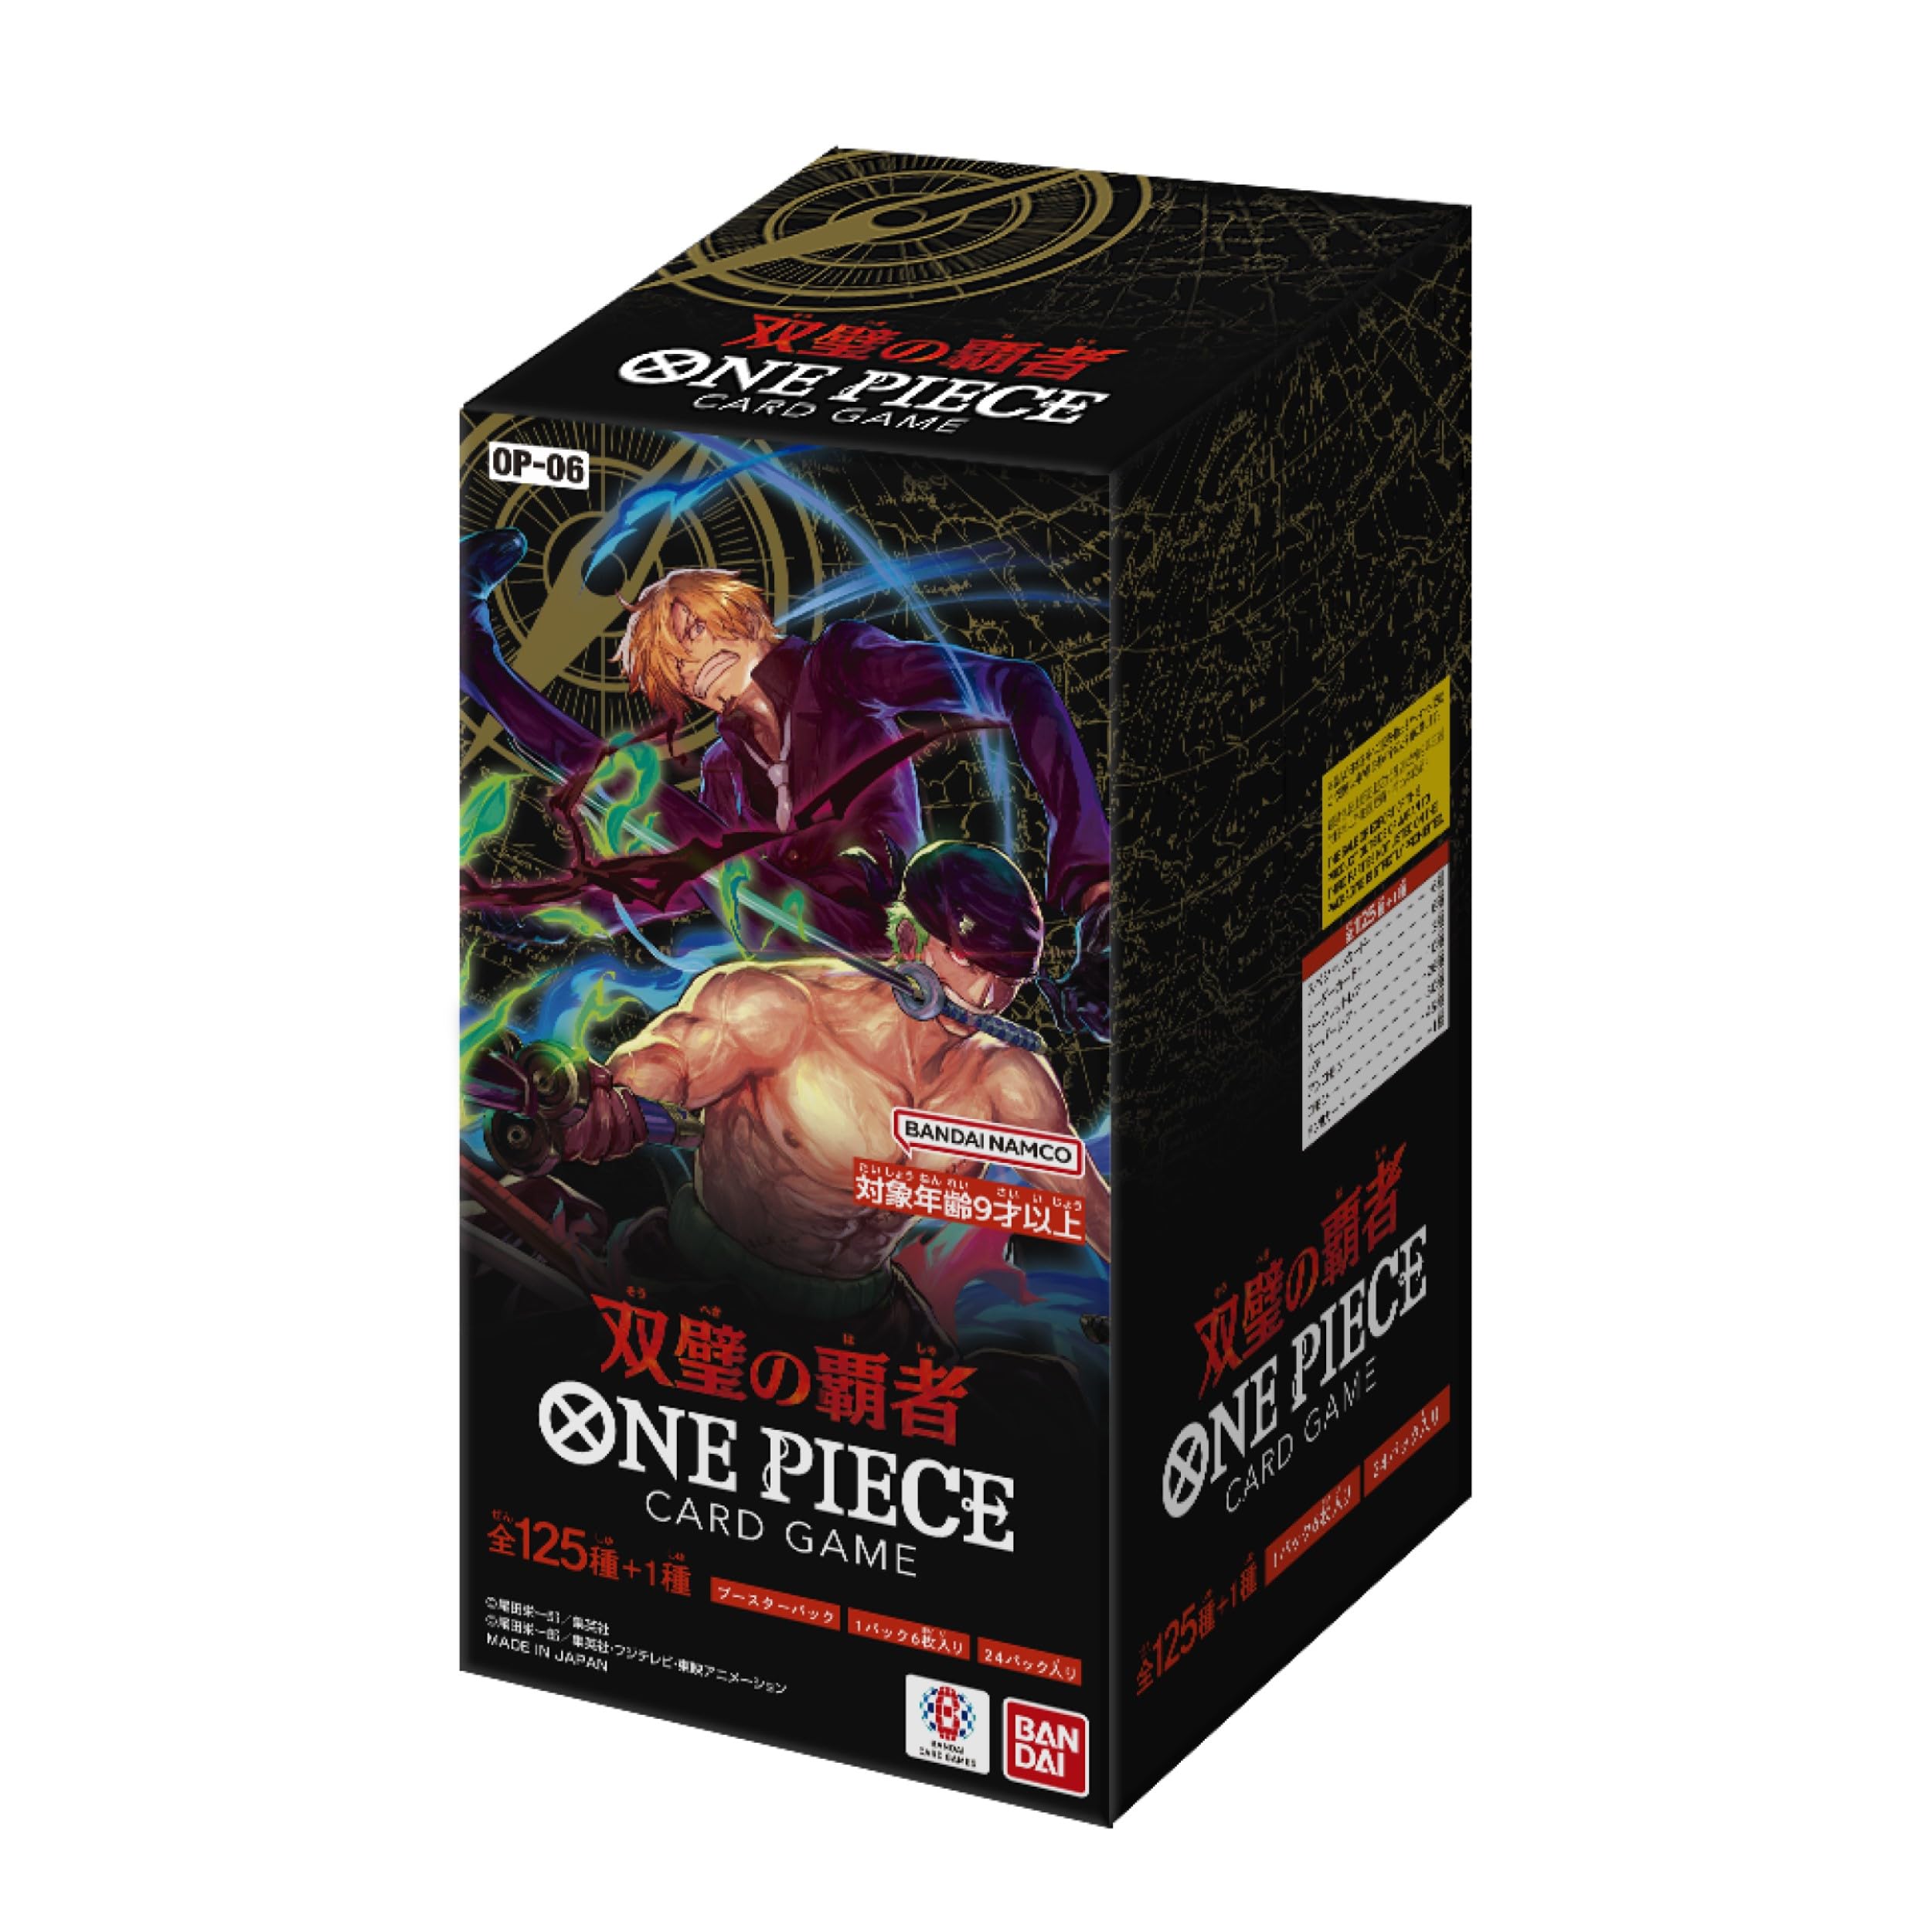 Bandai One Piece Card Game Wings of The Captain [OP-06] Box Japanische Version